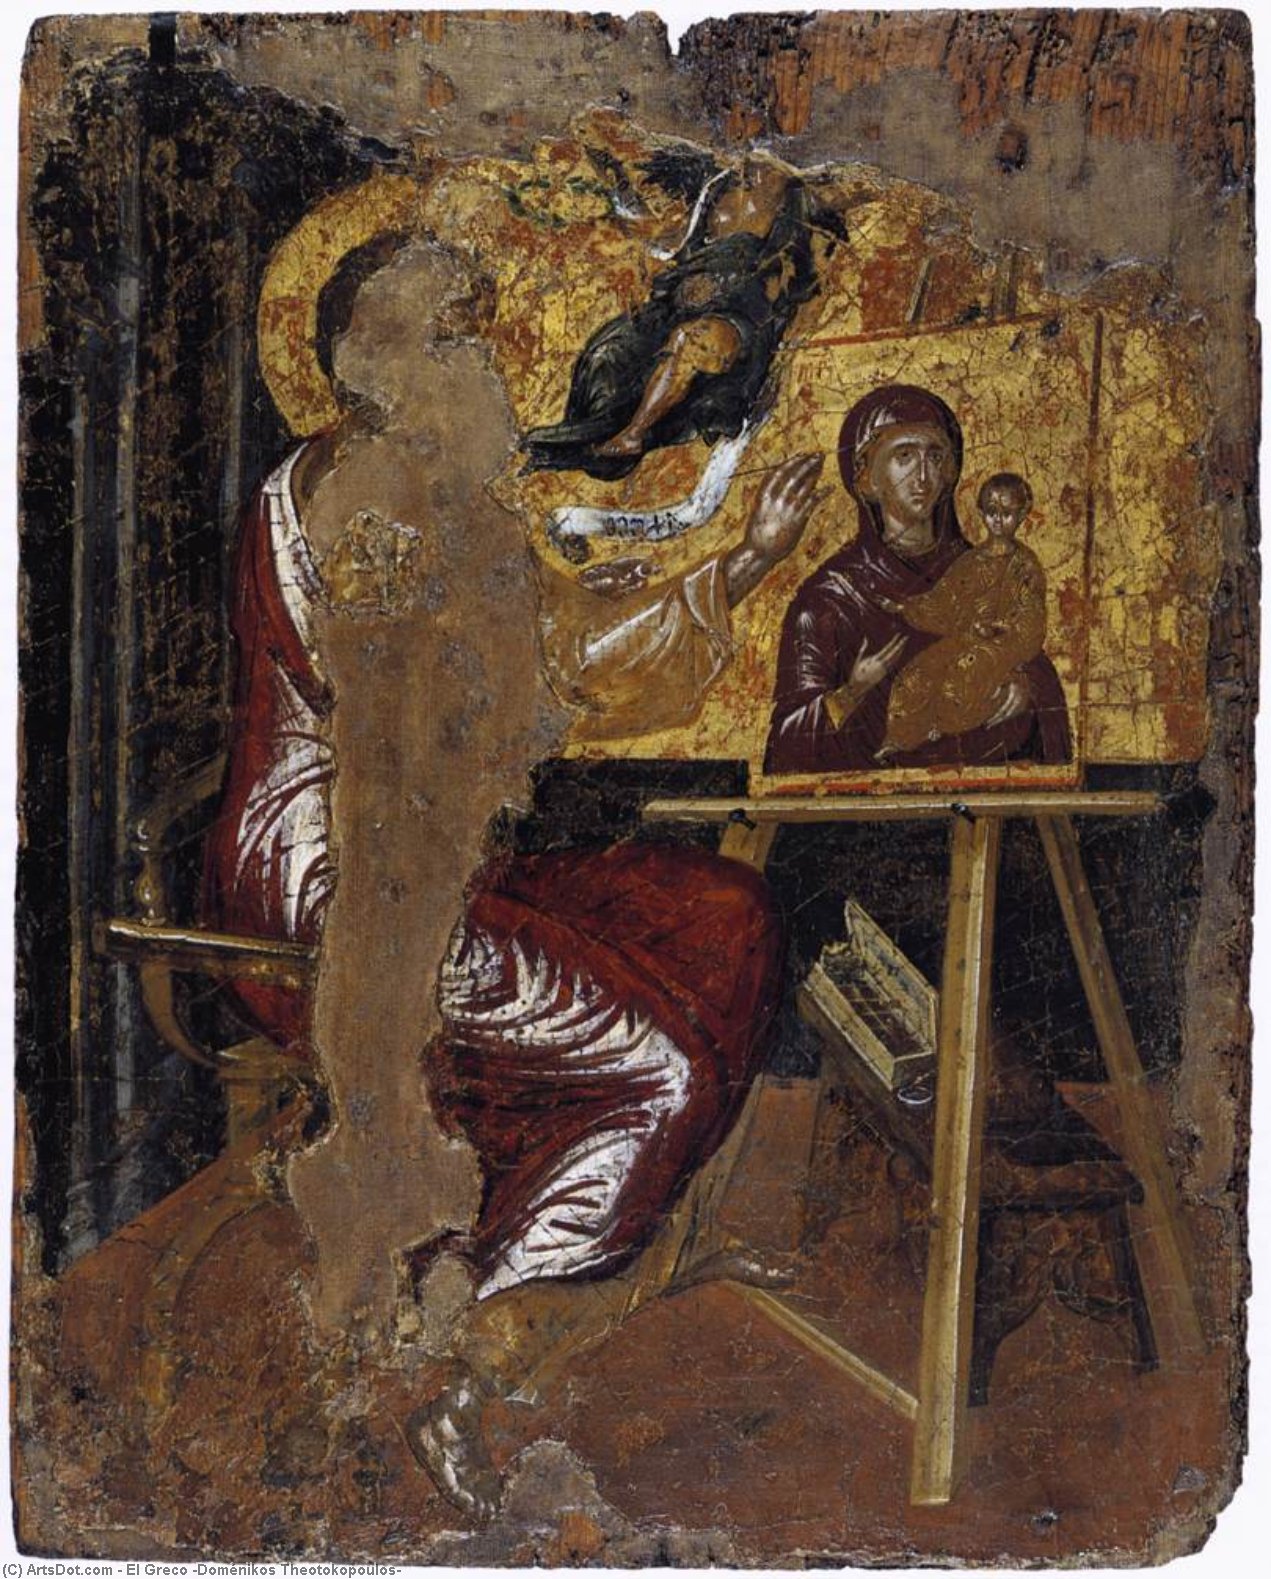 Order Paintings Reproductions St Luke Painting the Virgin and Child by El Greco (Doménikos Theotokopoulos) (1541-1614, Greece) | ArtsDot.com